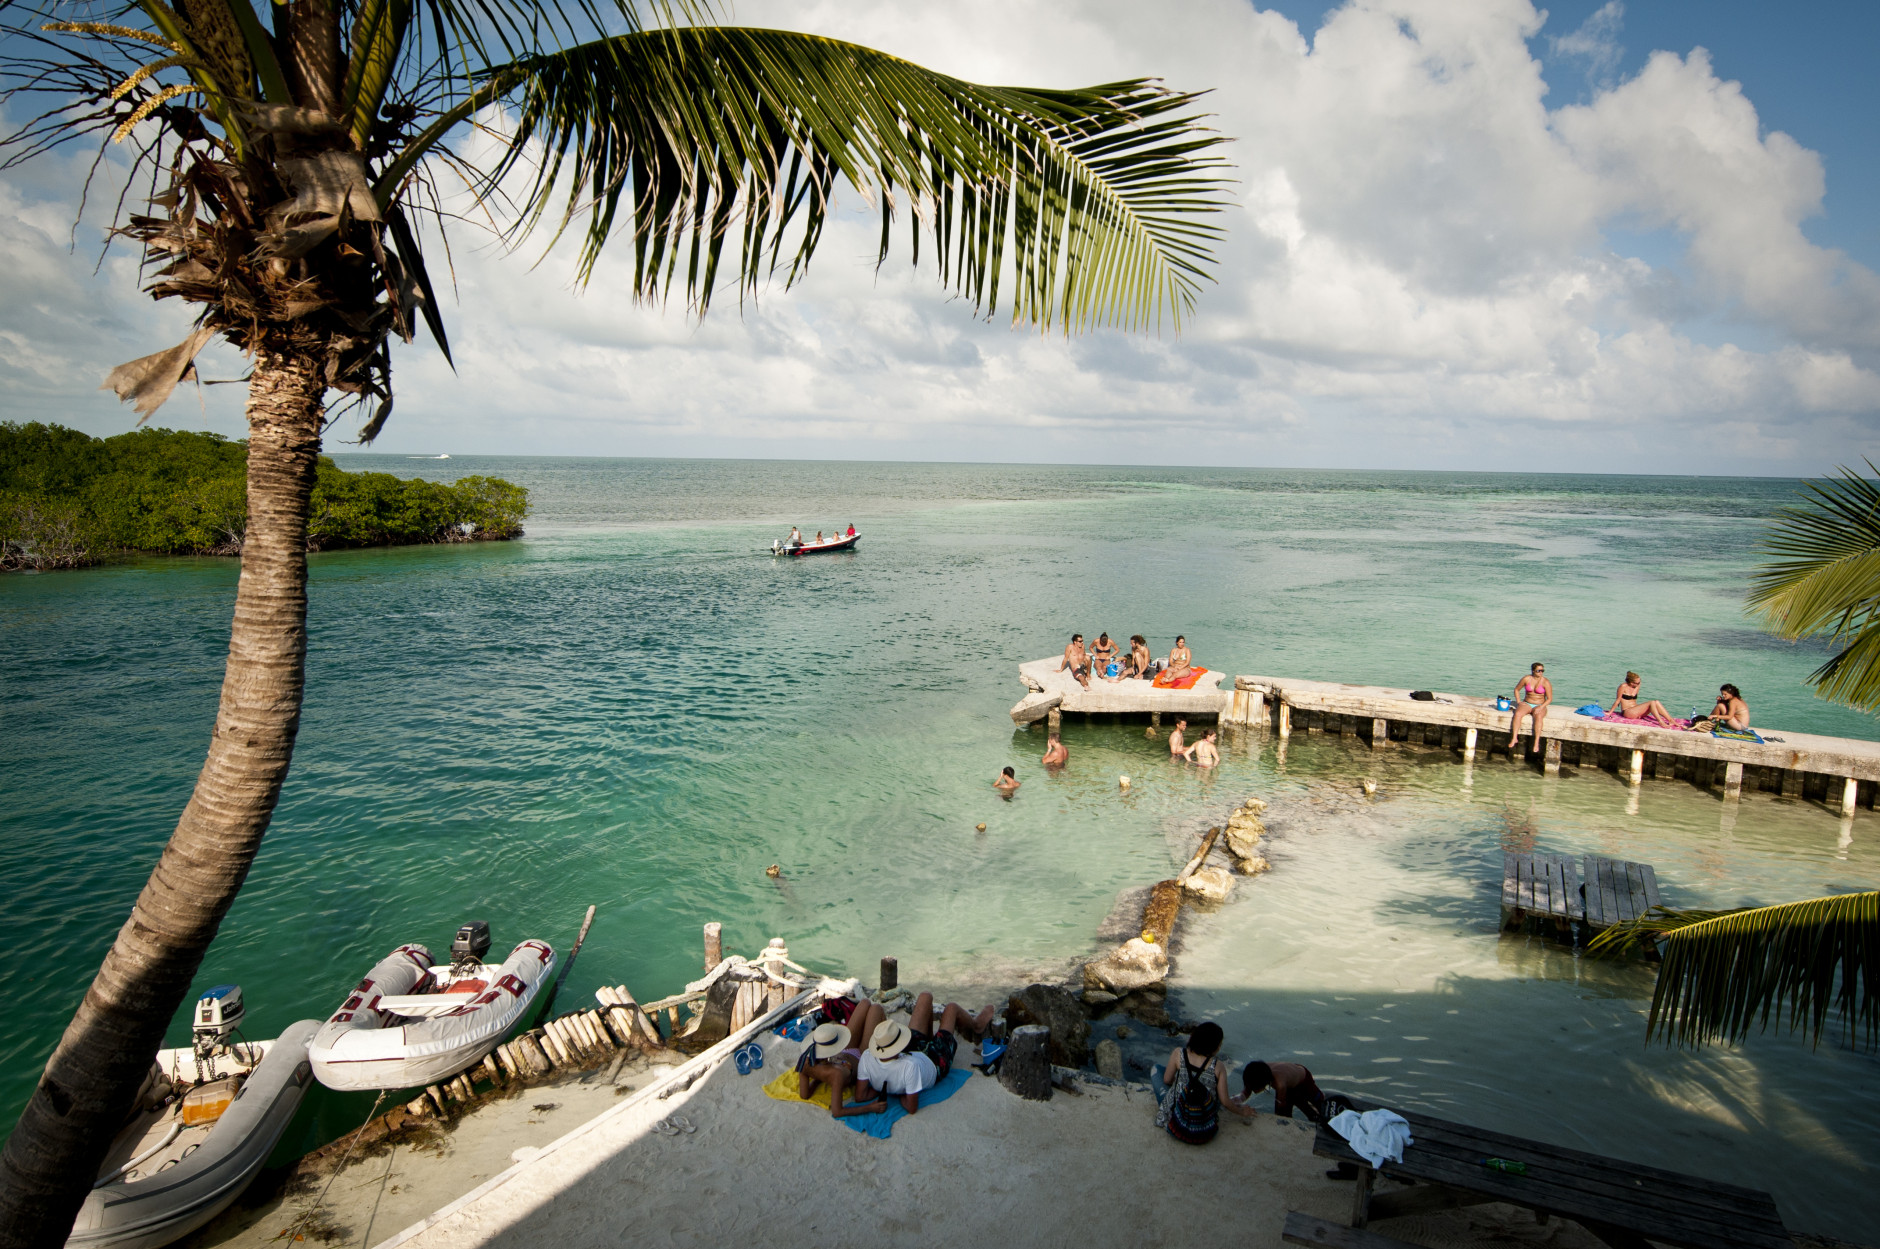 This undated photo provided by The Belize Tourism Board shows vacationers relaxing at Caye Caulker, Belize. The beach town is a laid-back, low-cost base for tourists looking to explore a nearby barrier reef. (AP Photo/The Belize Tourist Board)